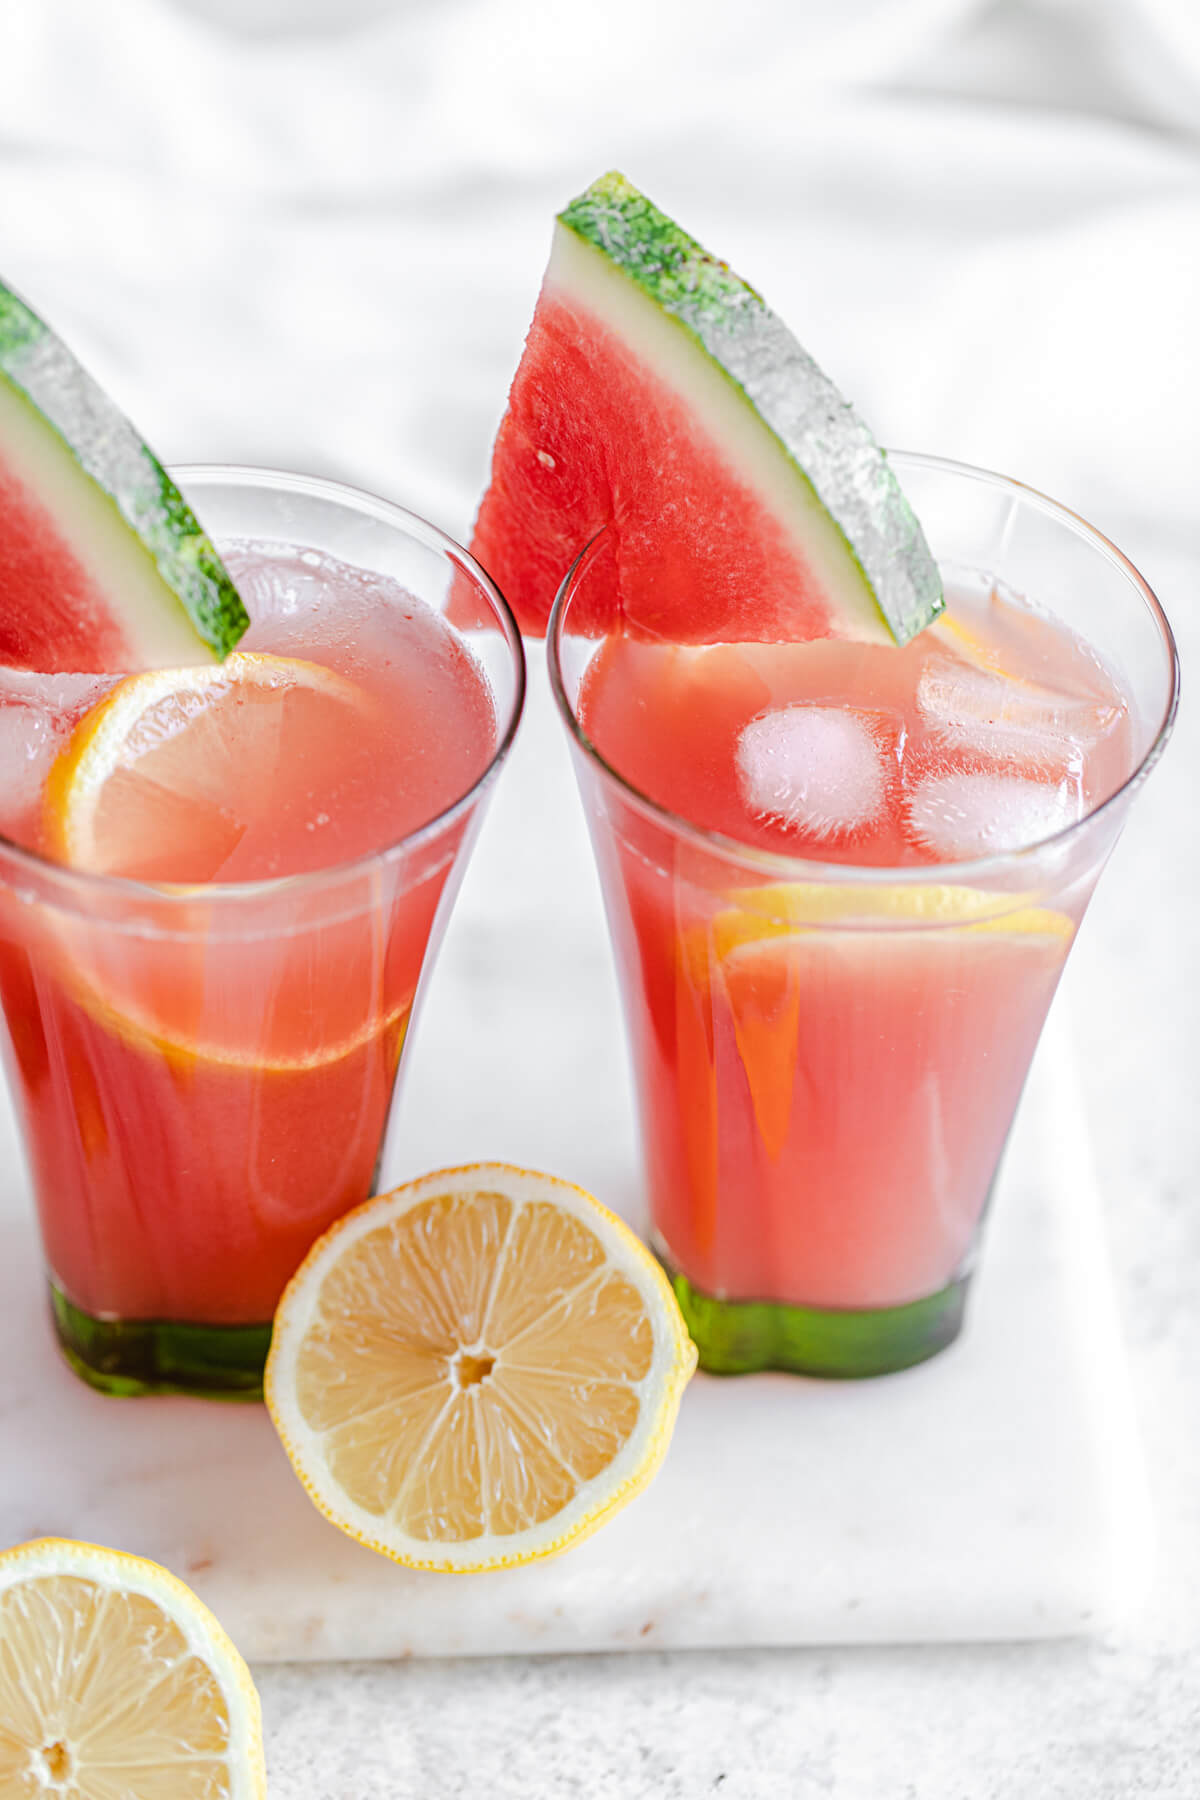 angled view showing lemonade in two glasses with ice, lemon slices and a wedge of watermelon on the rim